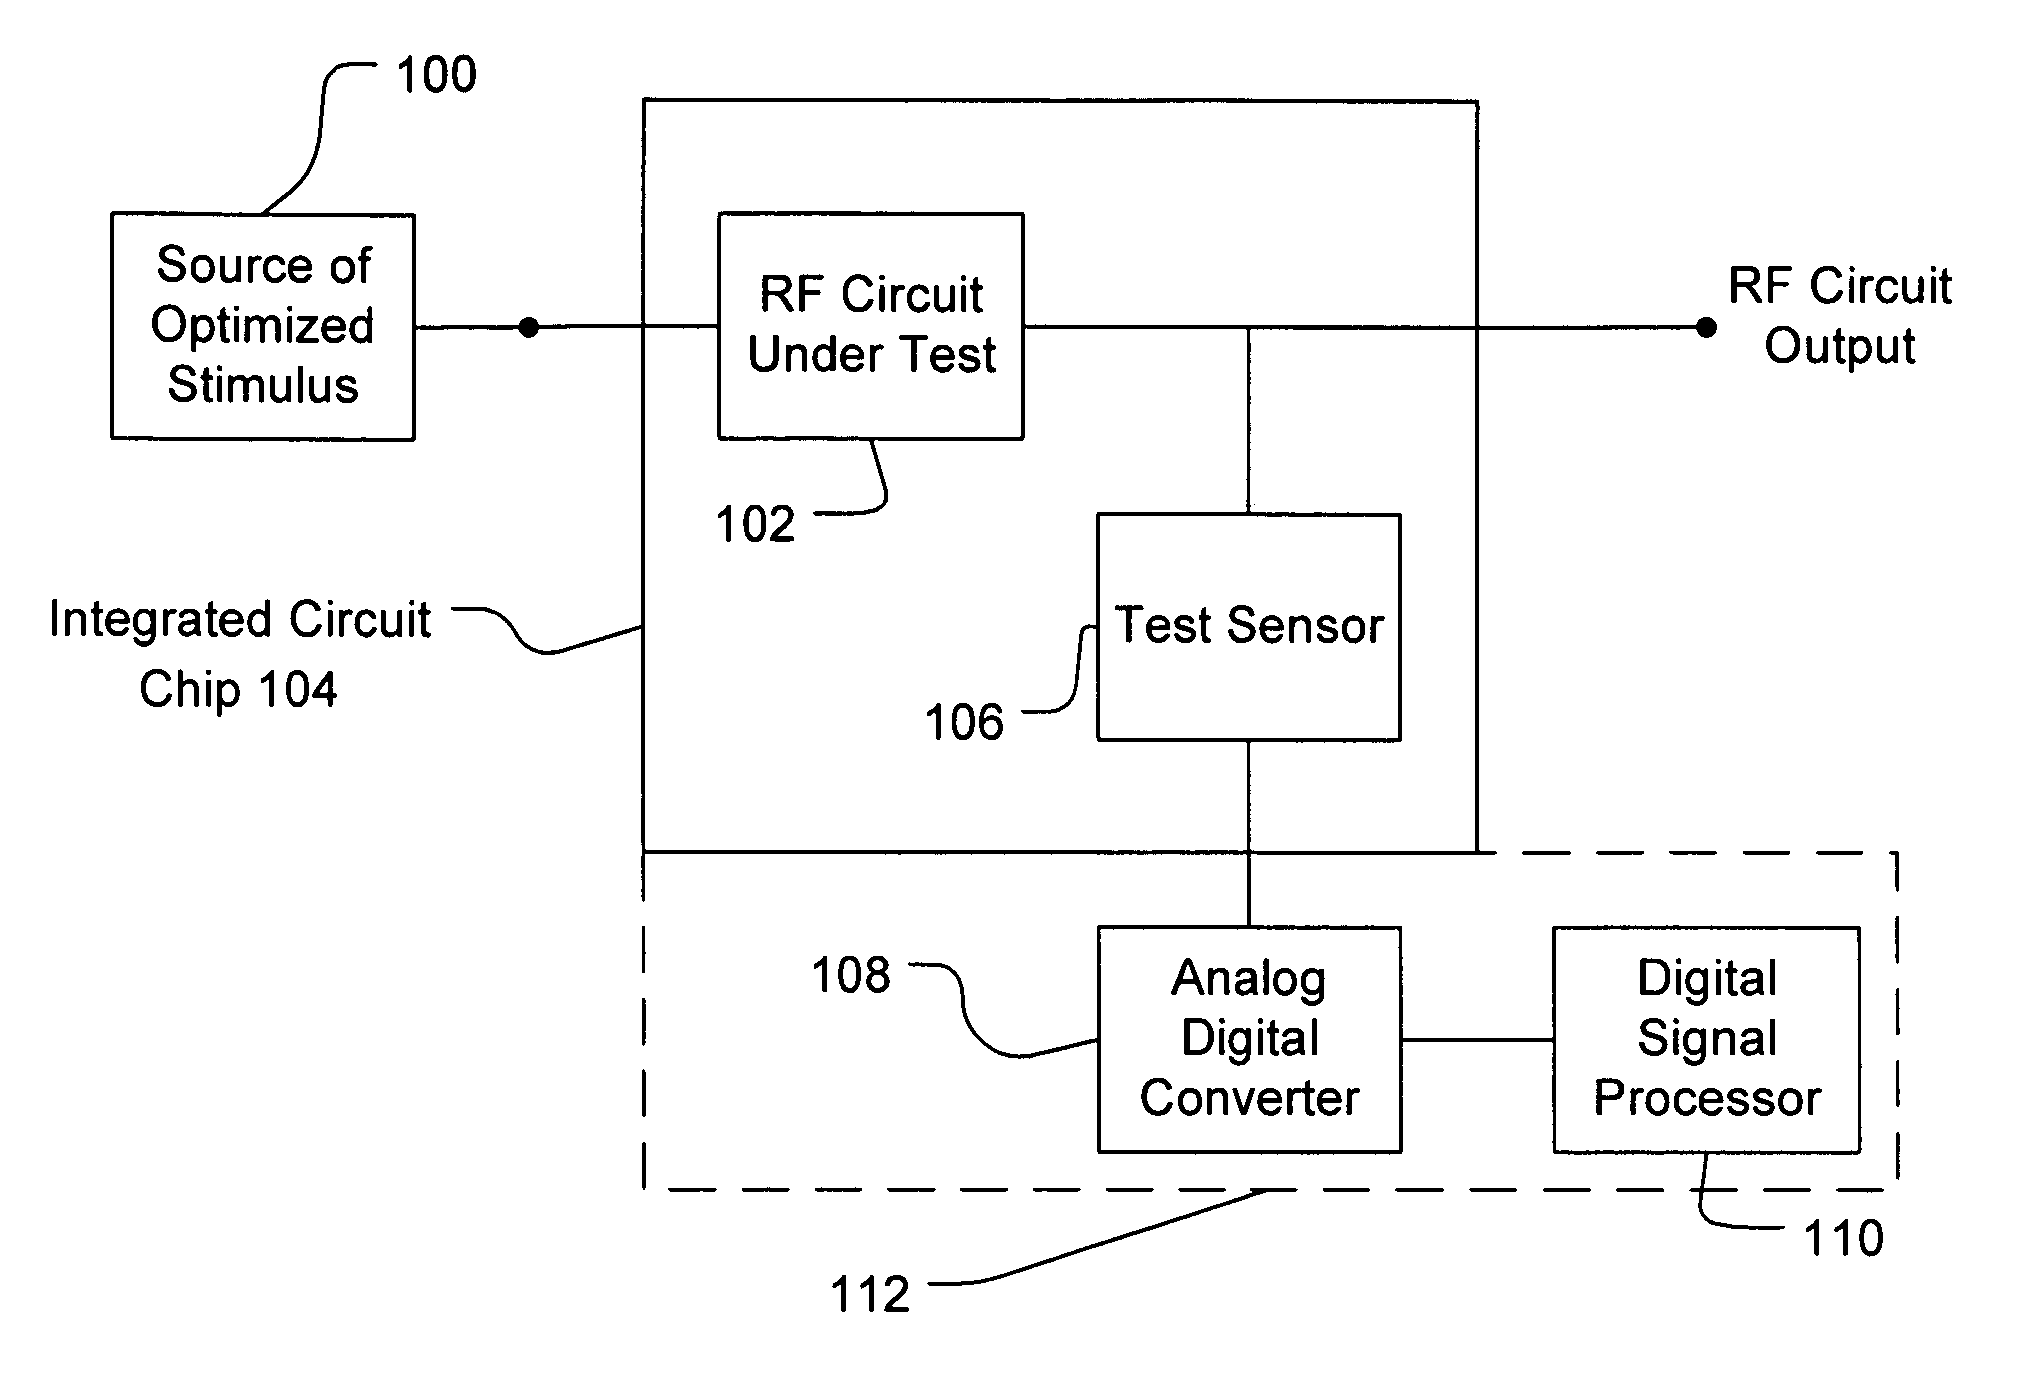 Production test technique for RF circuits using embedded test sensors